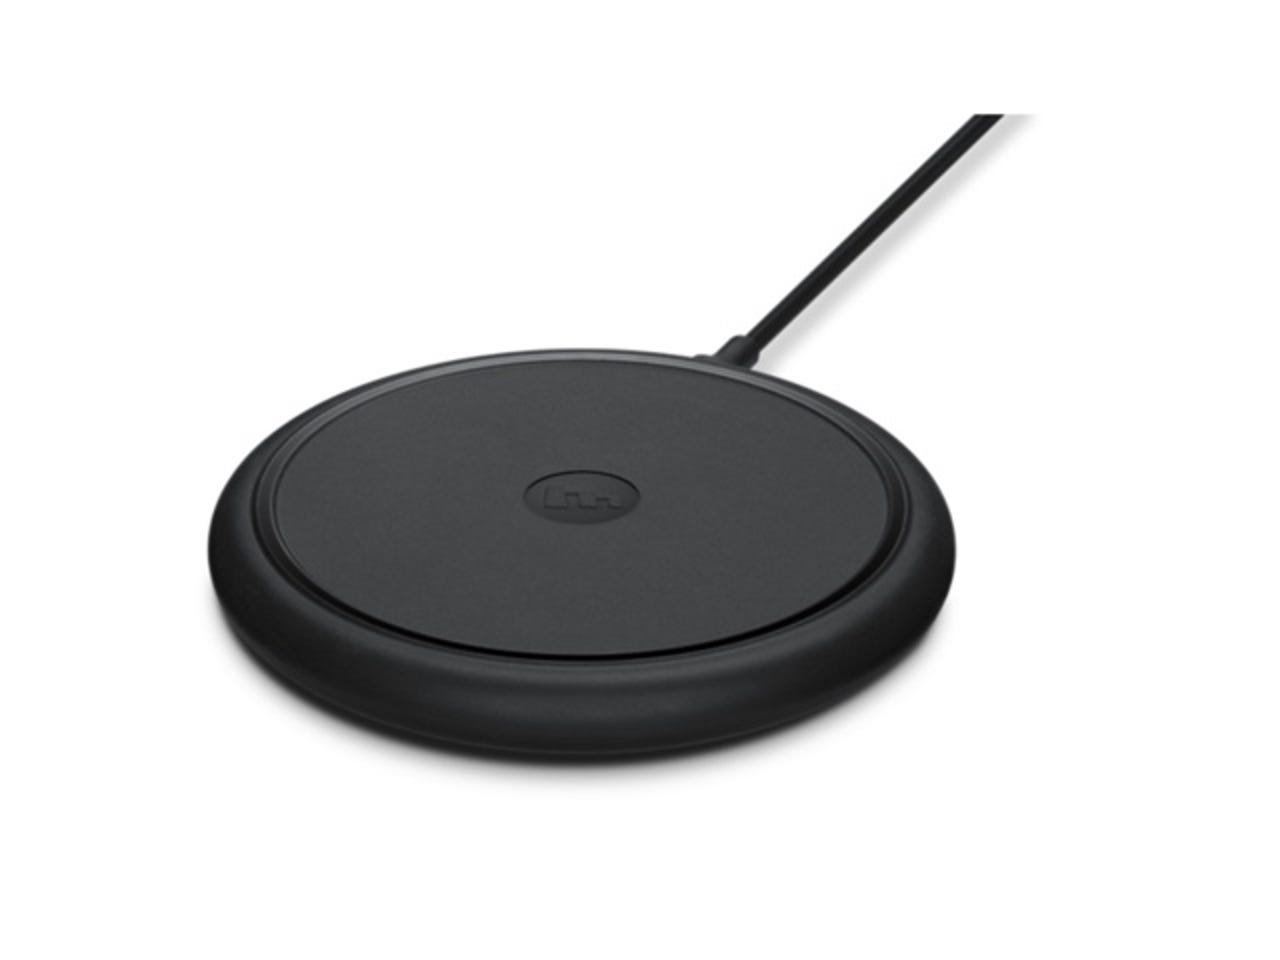 Mophie wireless charging base